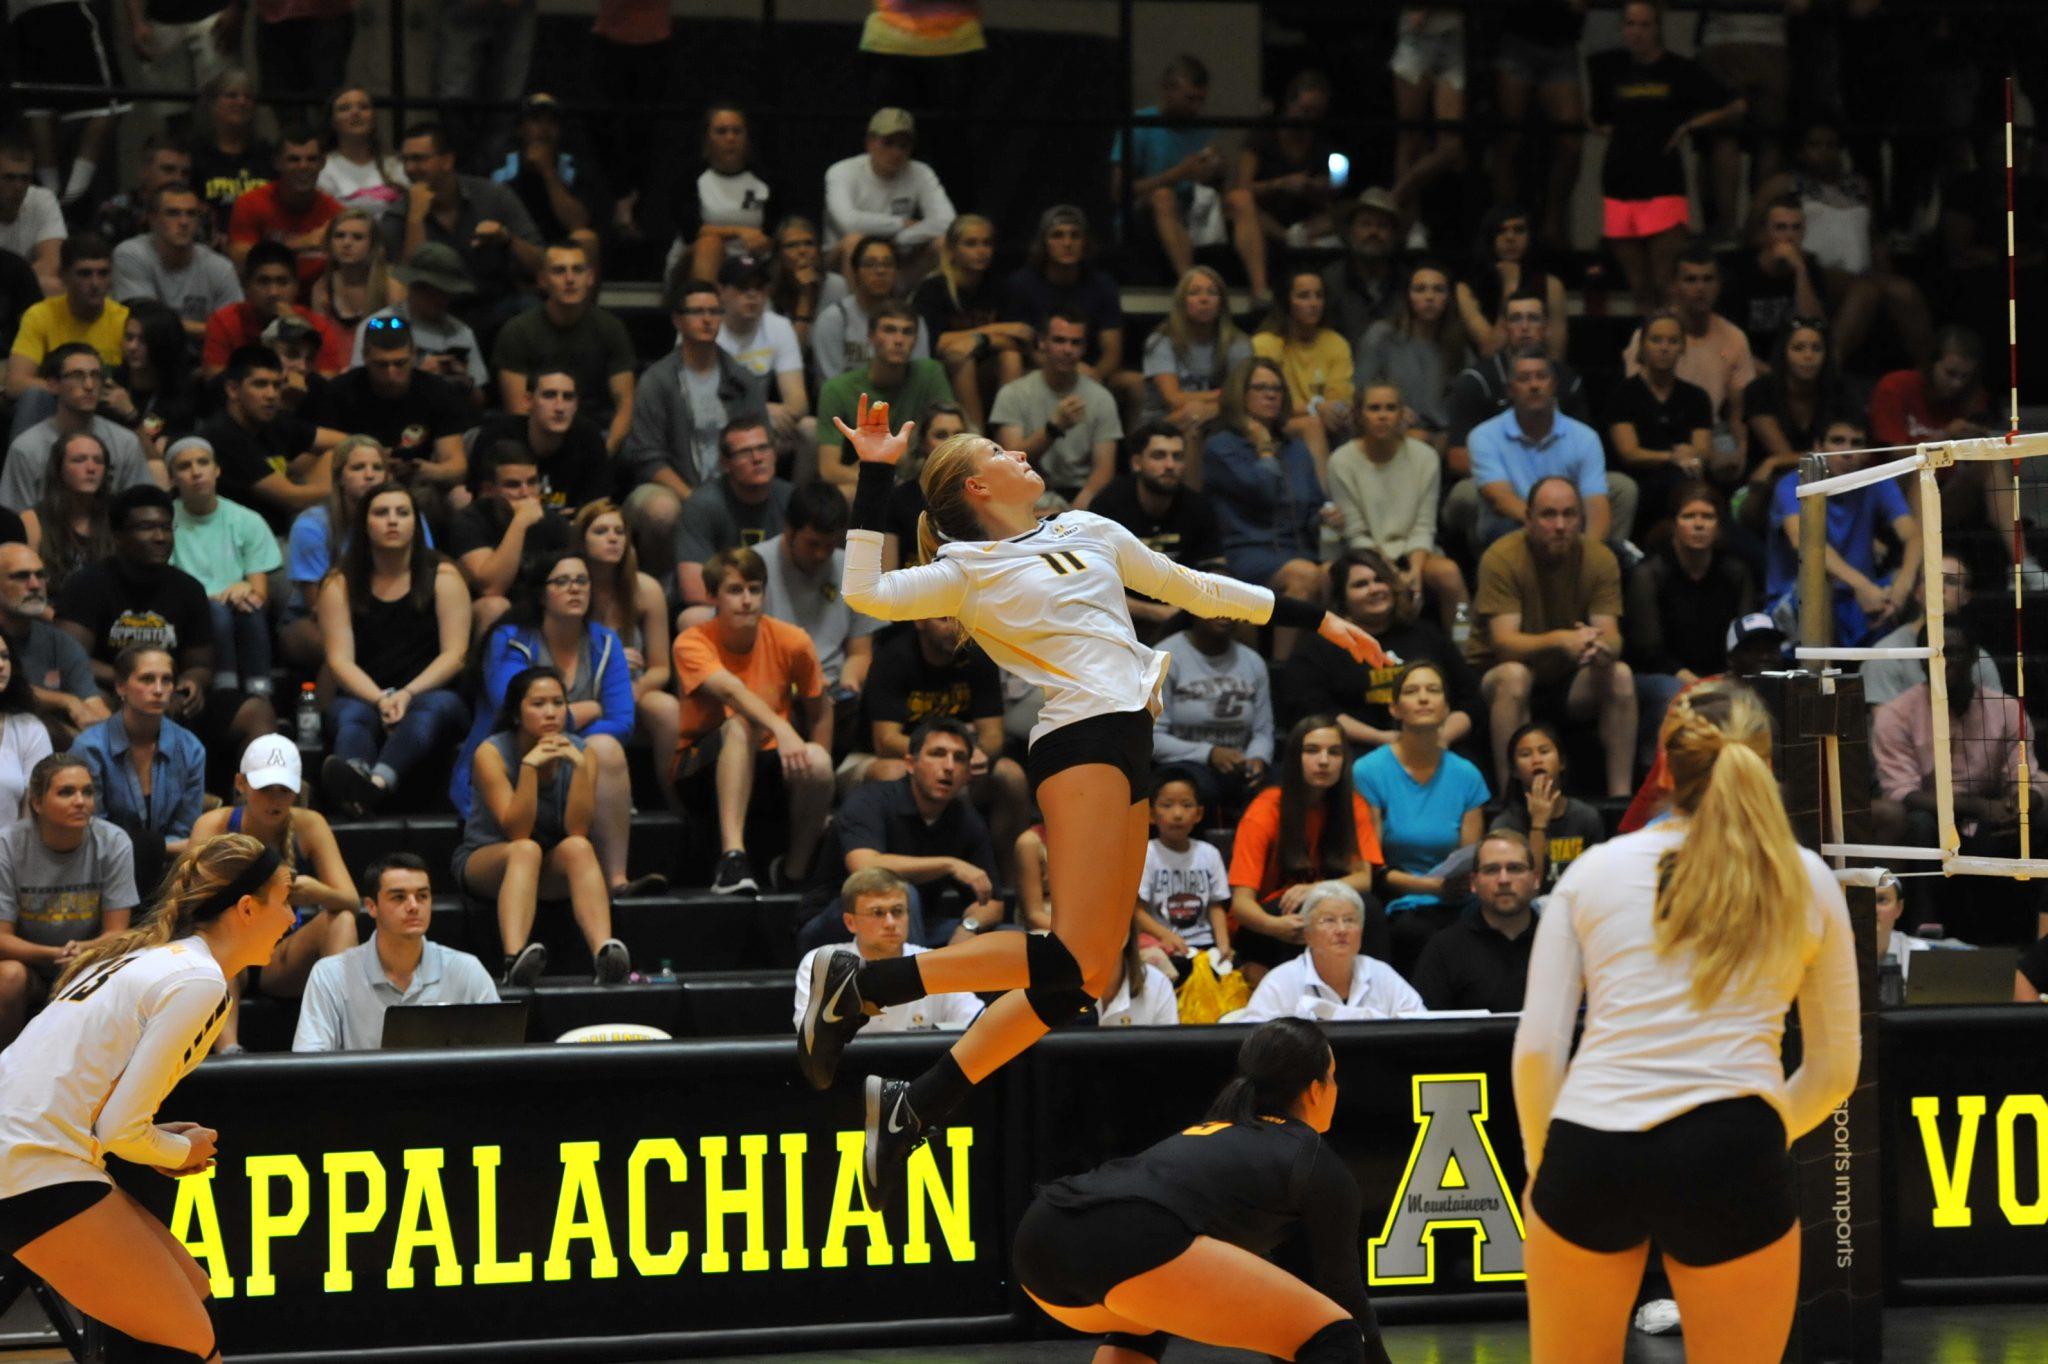 Freshman Emma Longley goes up for a spike during Fridays game. Courtesy: Dave Mayo/Appalachian State Athletics
